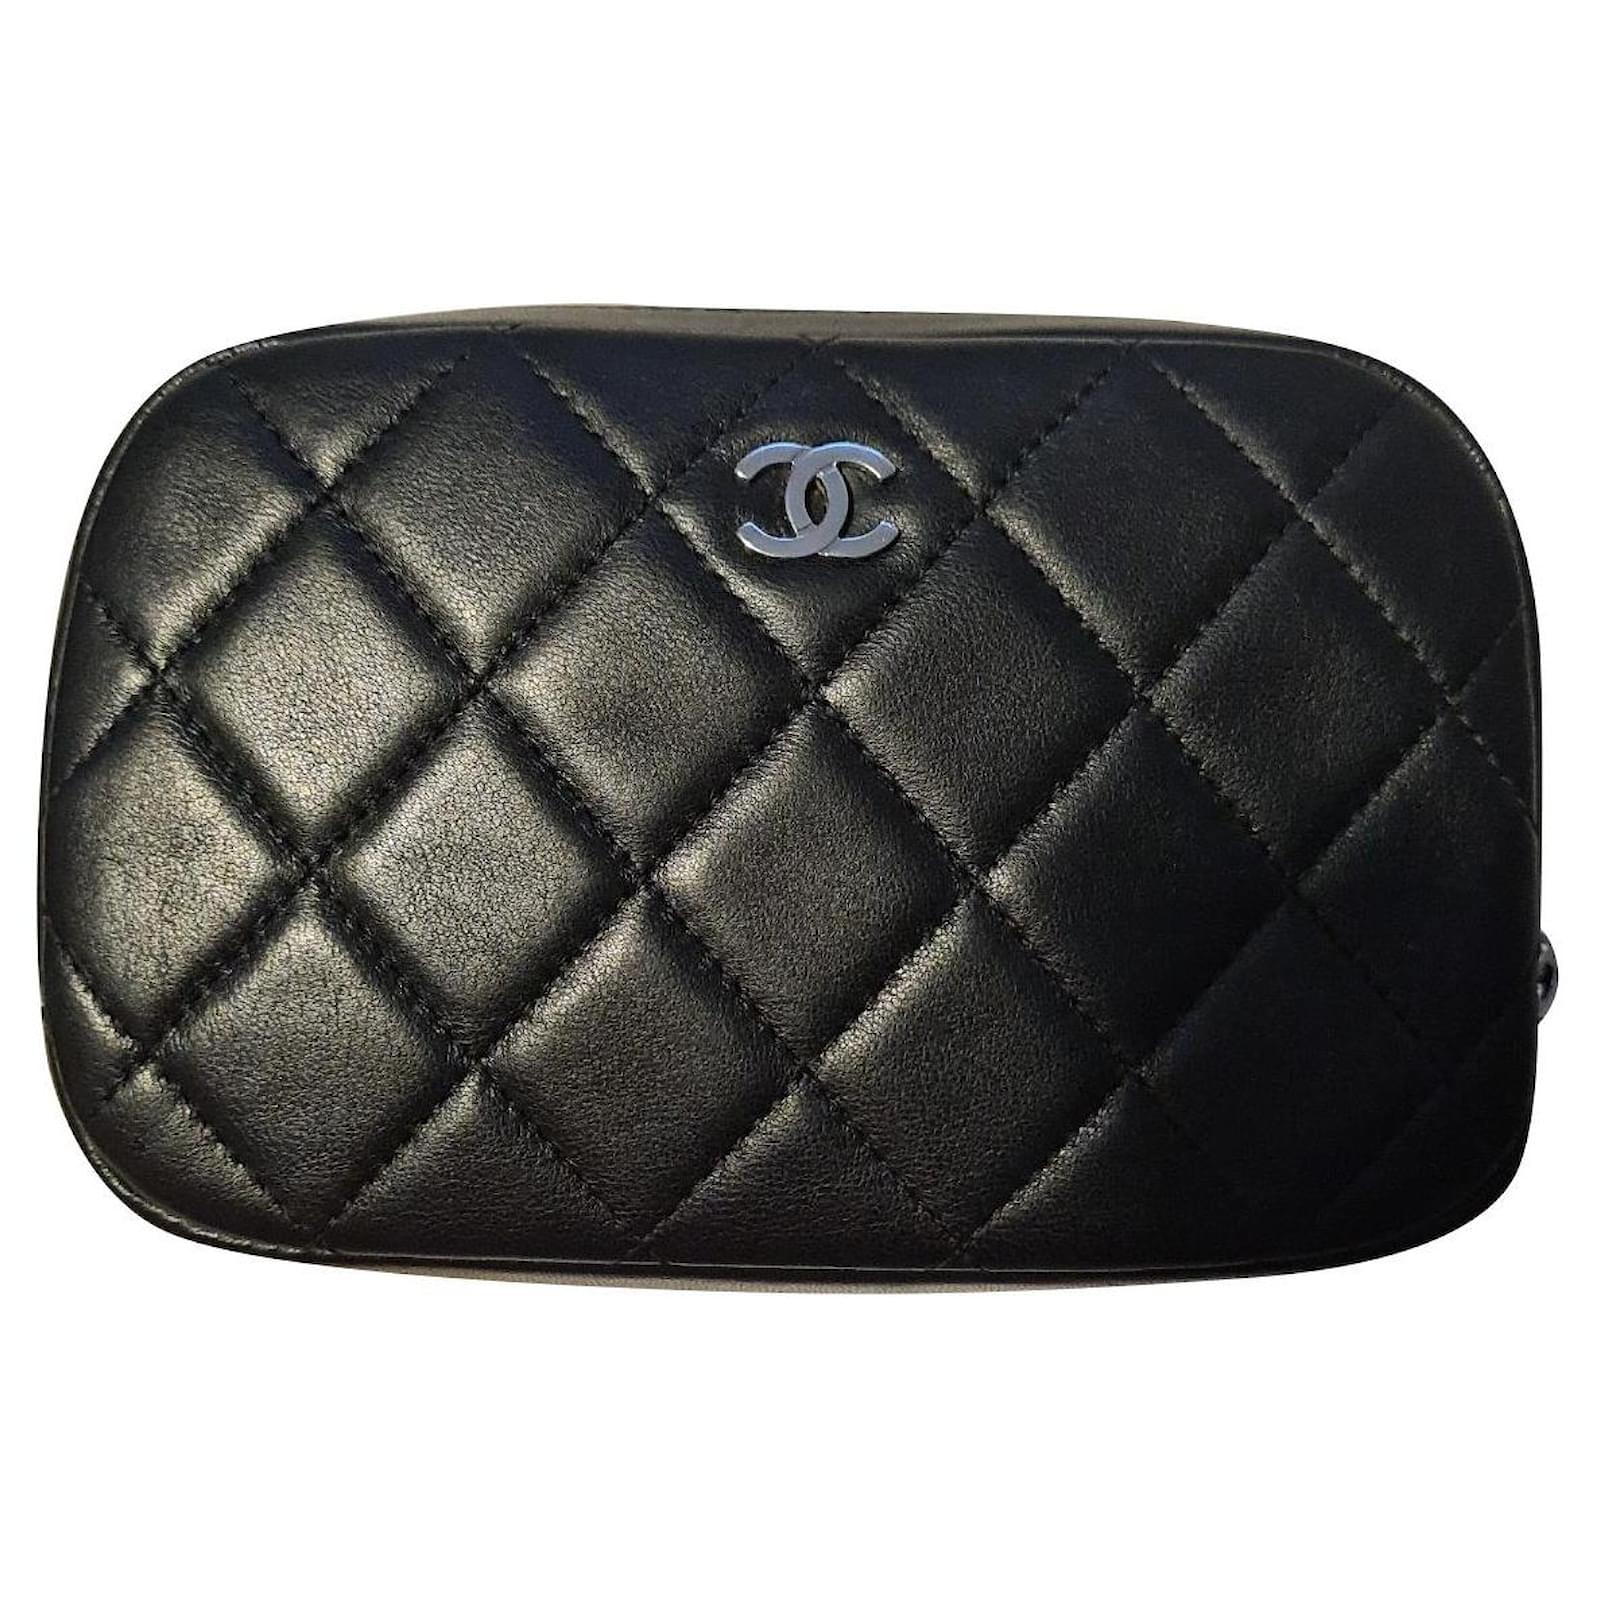 CHANEL Caviar Quilted Curvy Pouch Cosmetic Case Black 1301792